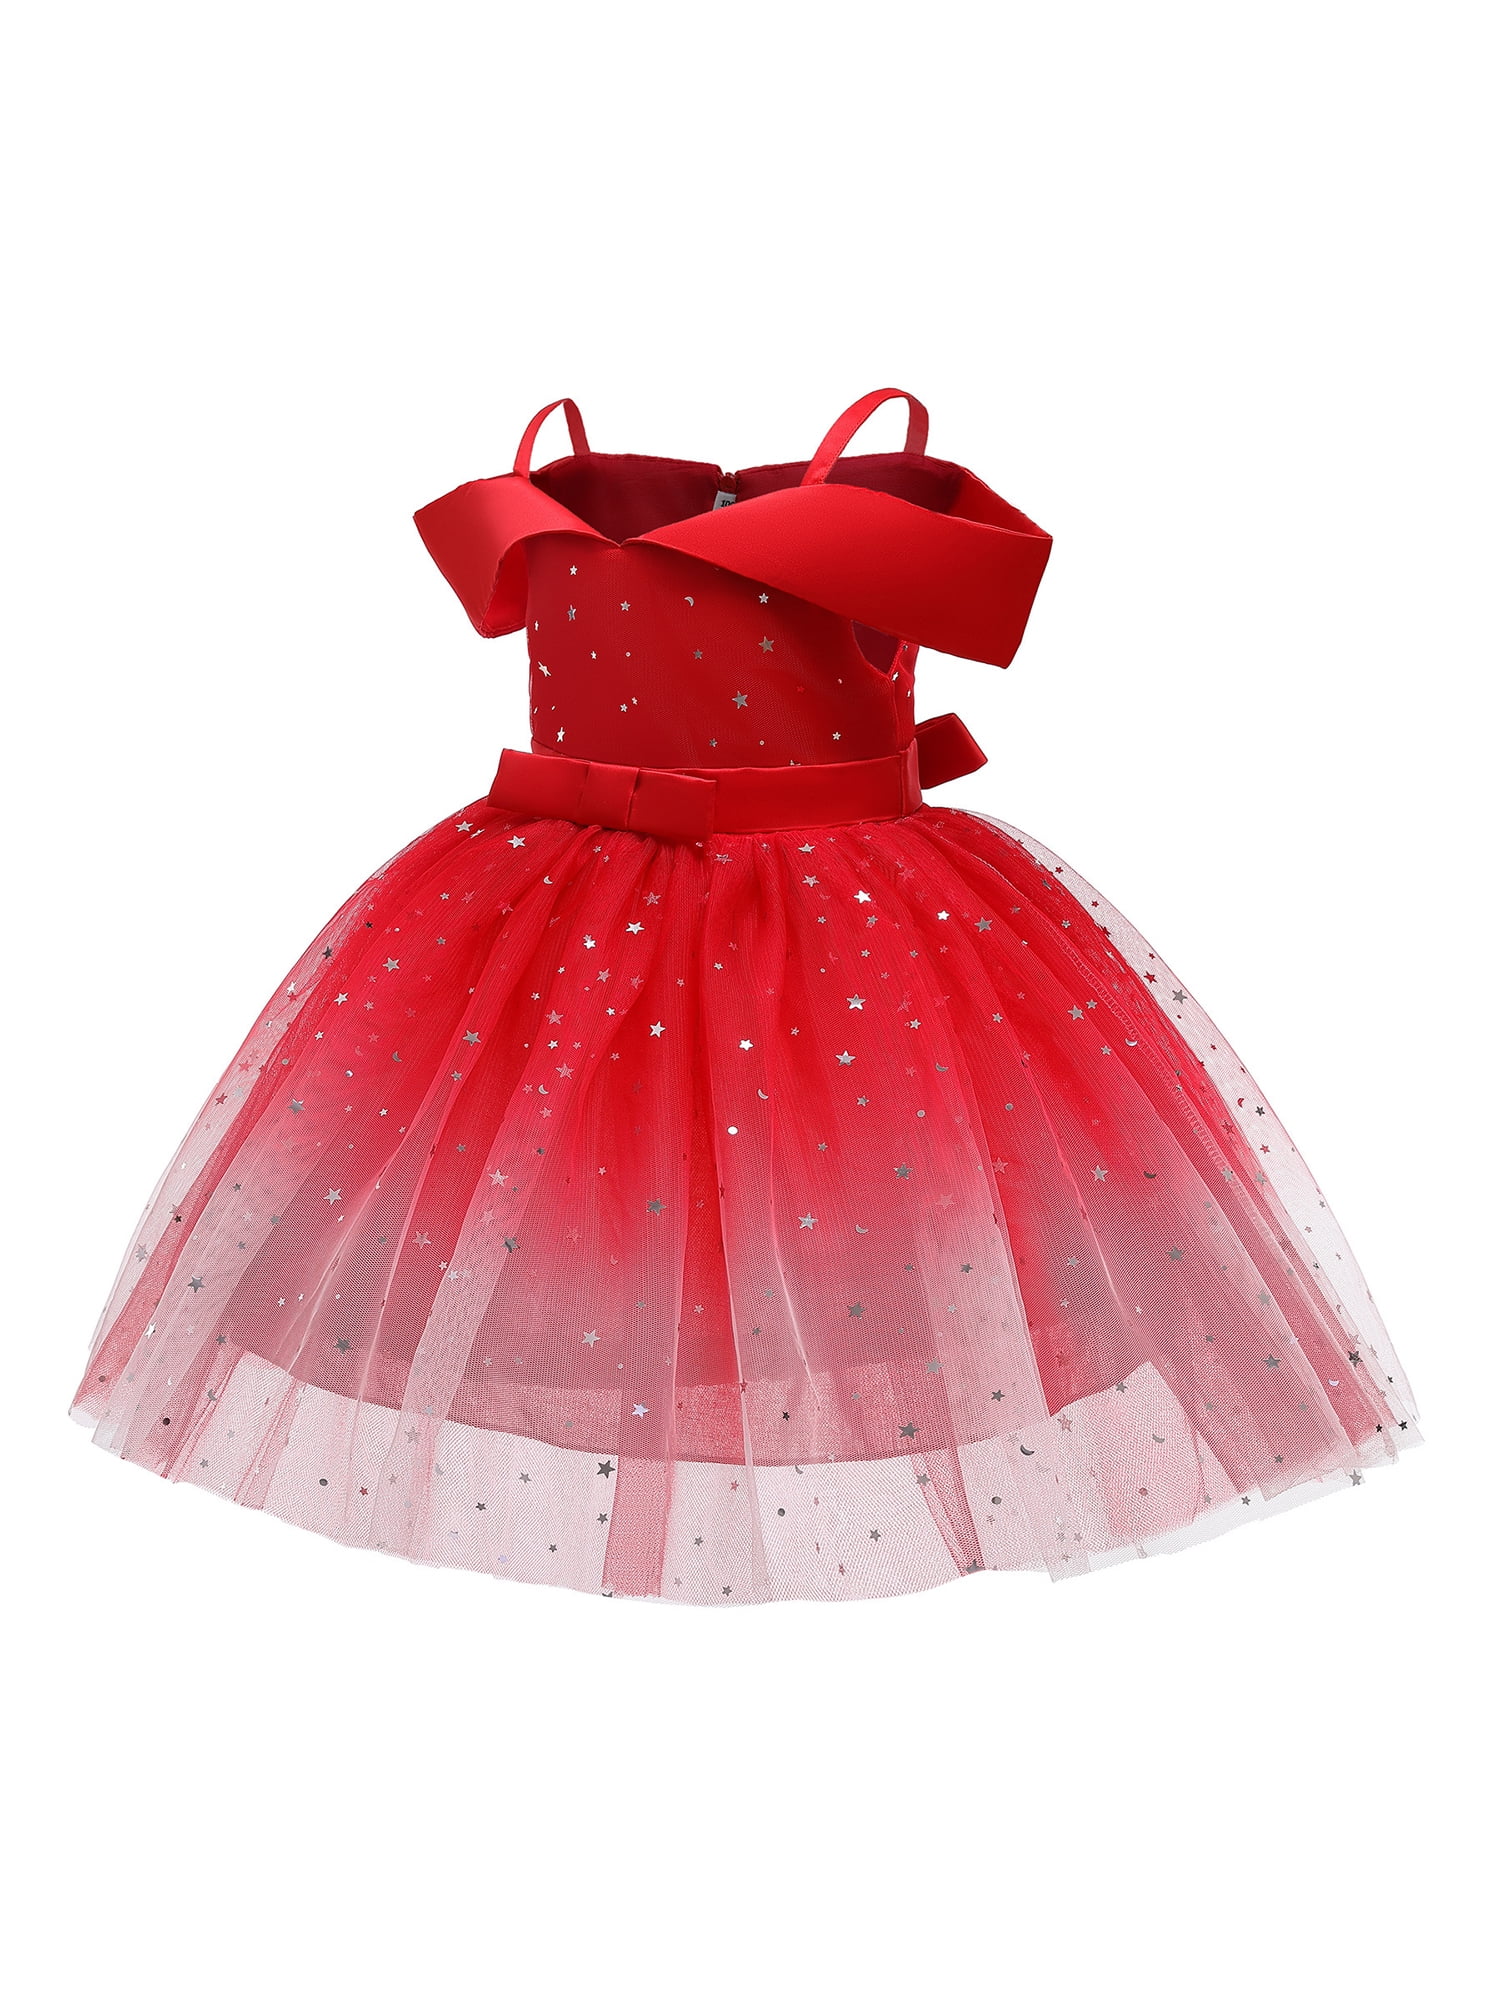 Baby Toddler Girl Summer Princess Birthday Party Pageant Tutu Tulle Dress 1-3T 